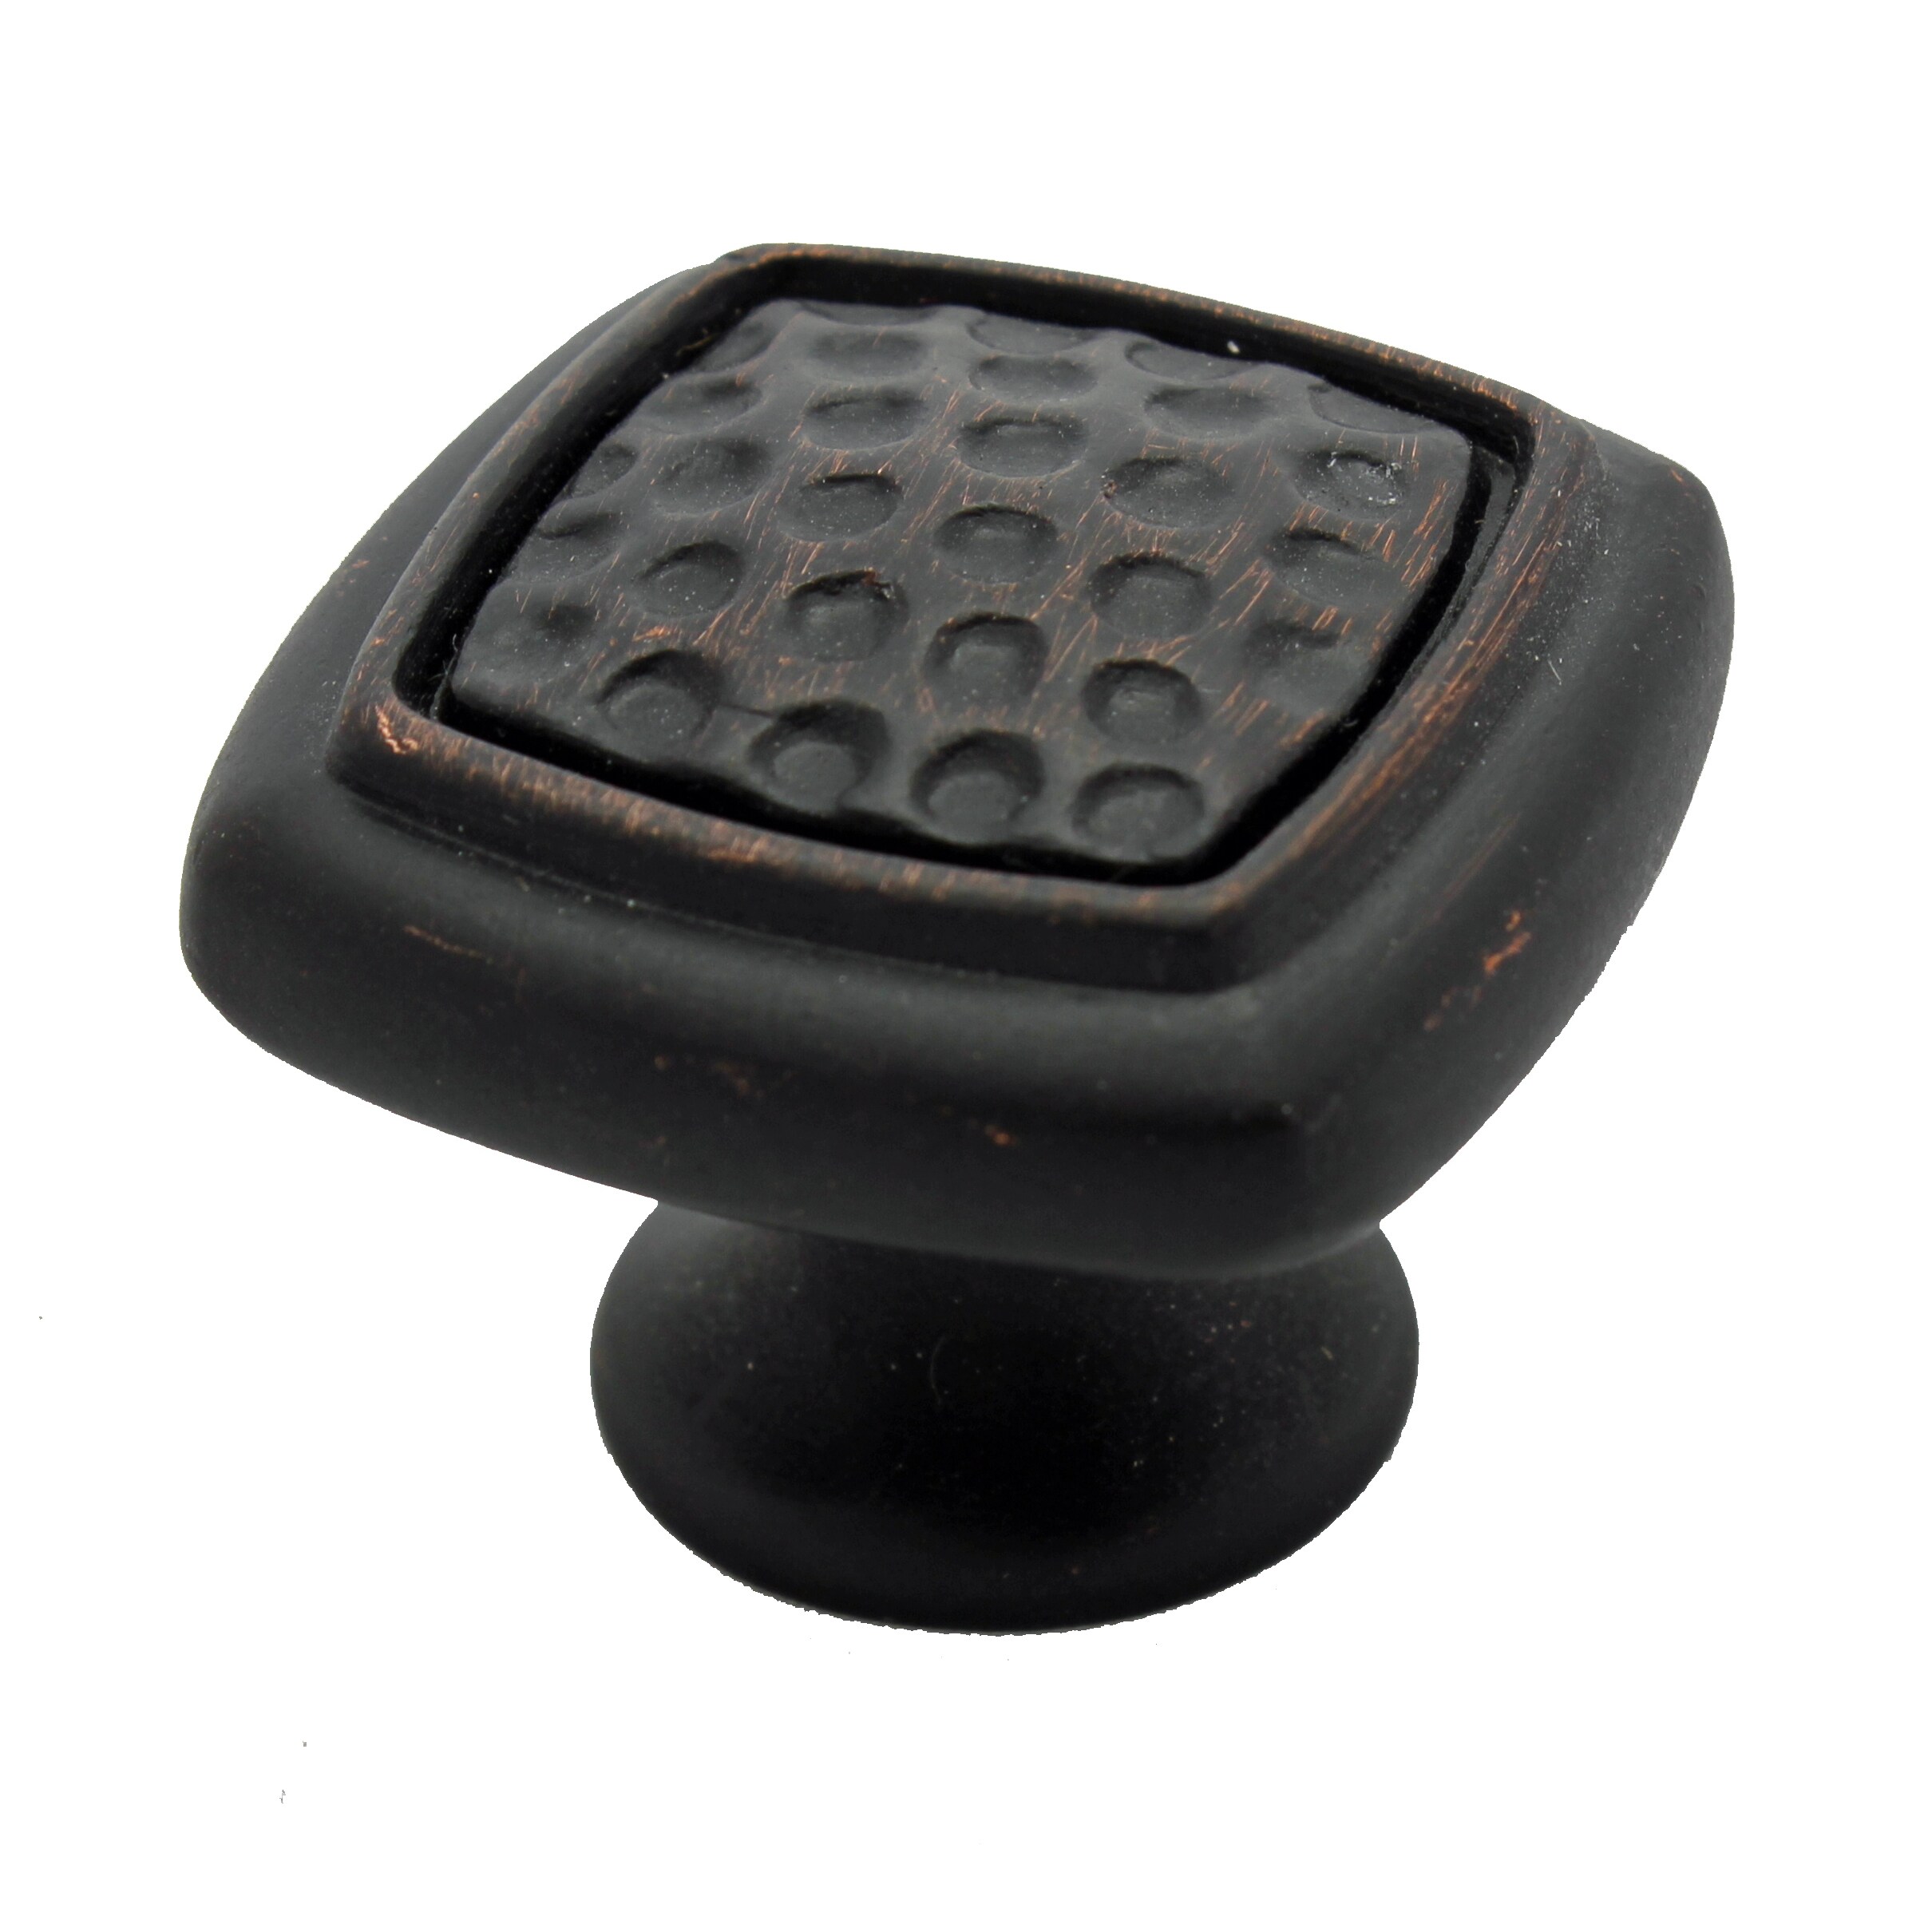 GlideRite 1-1/4 in. Transitional Dotted Square Cabinet Knobs, Oil Rubbed Bronze, Pack of 10 - image 2 of 4